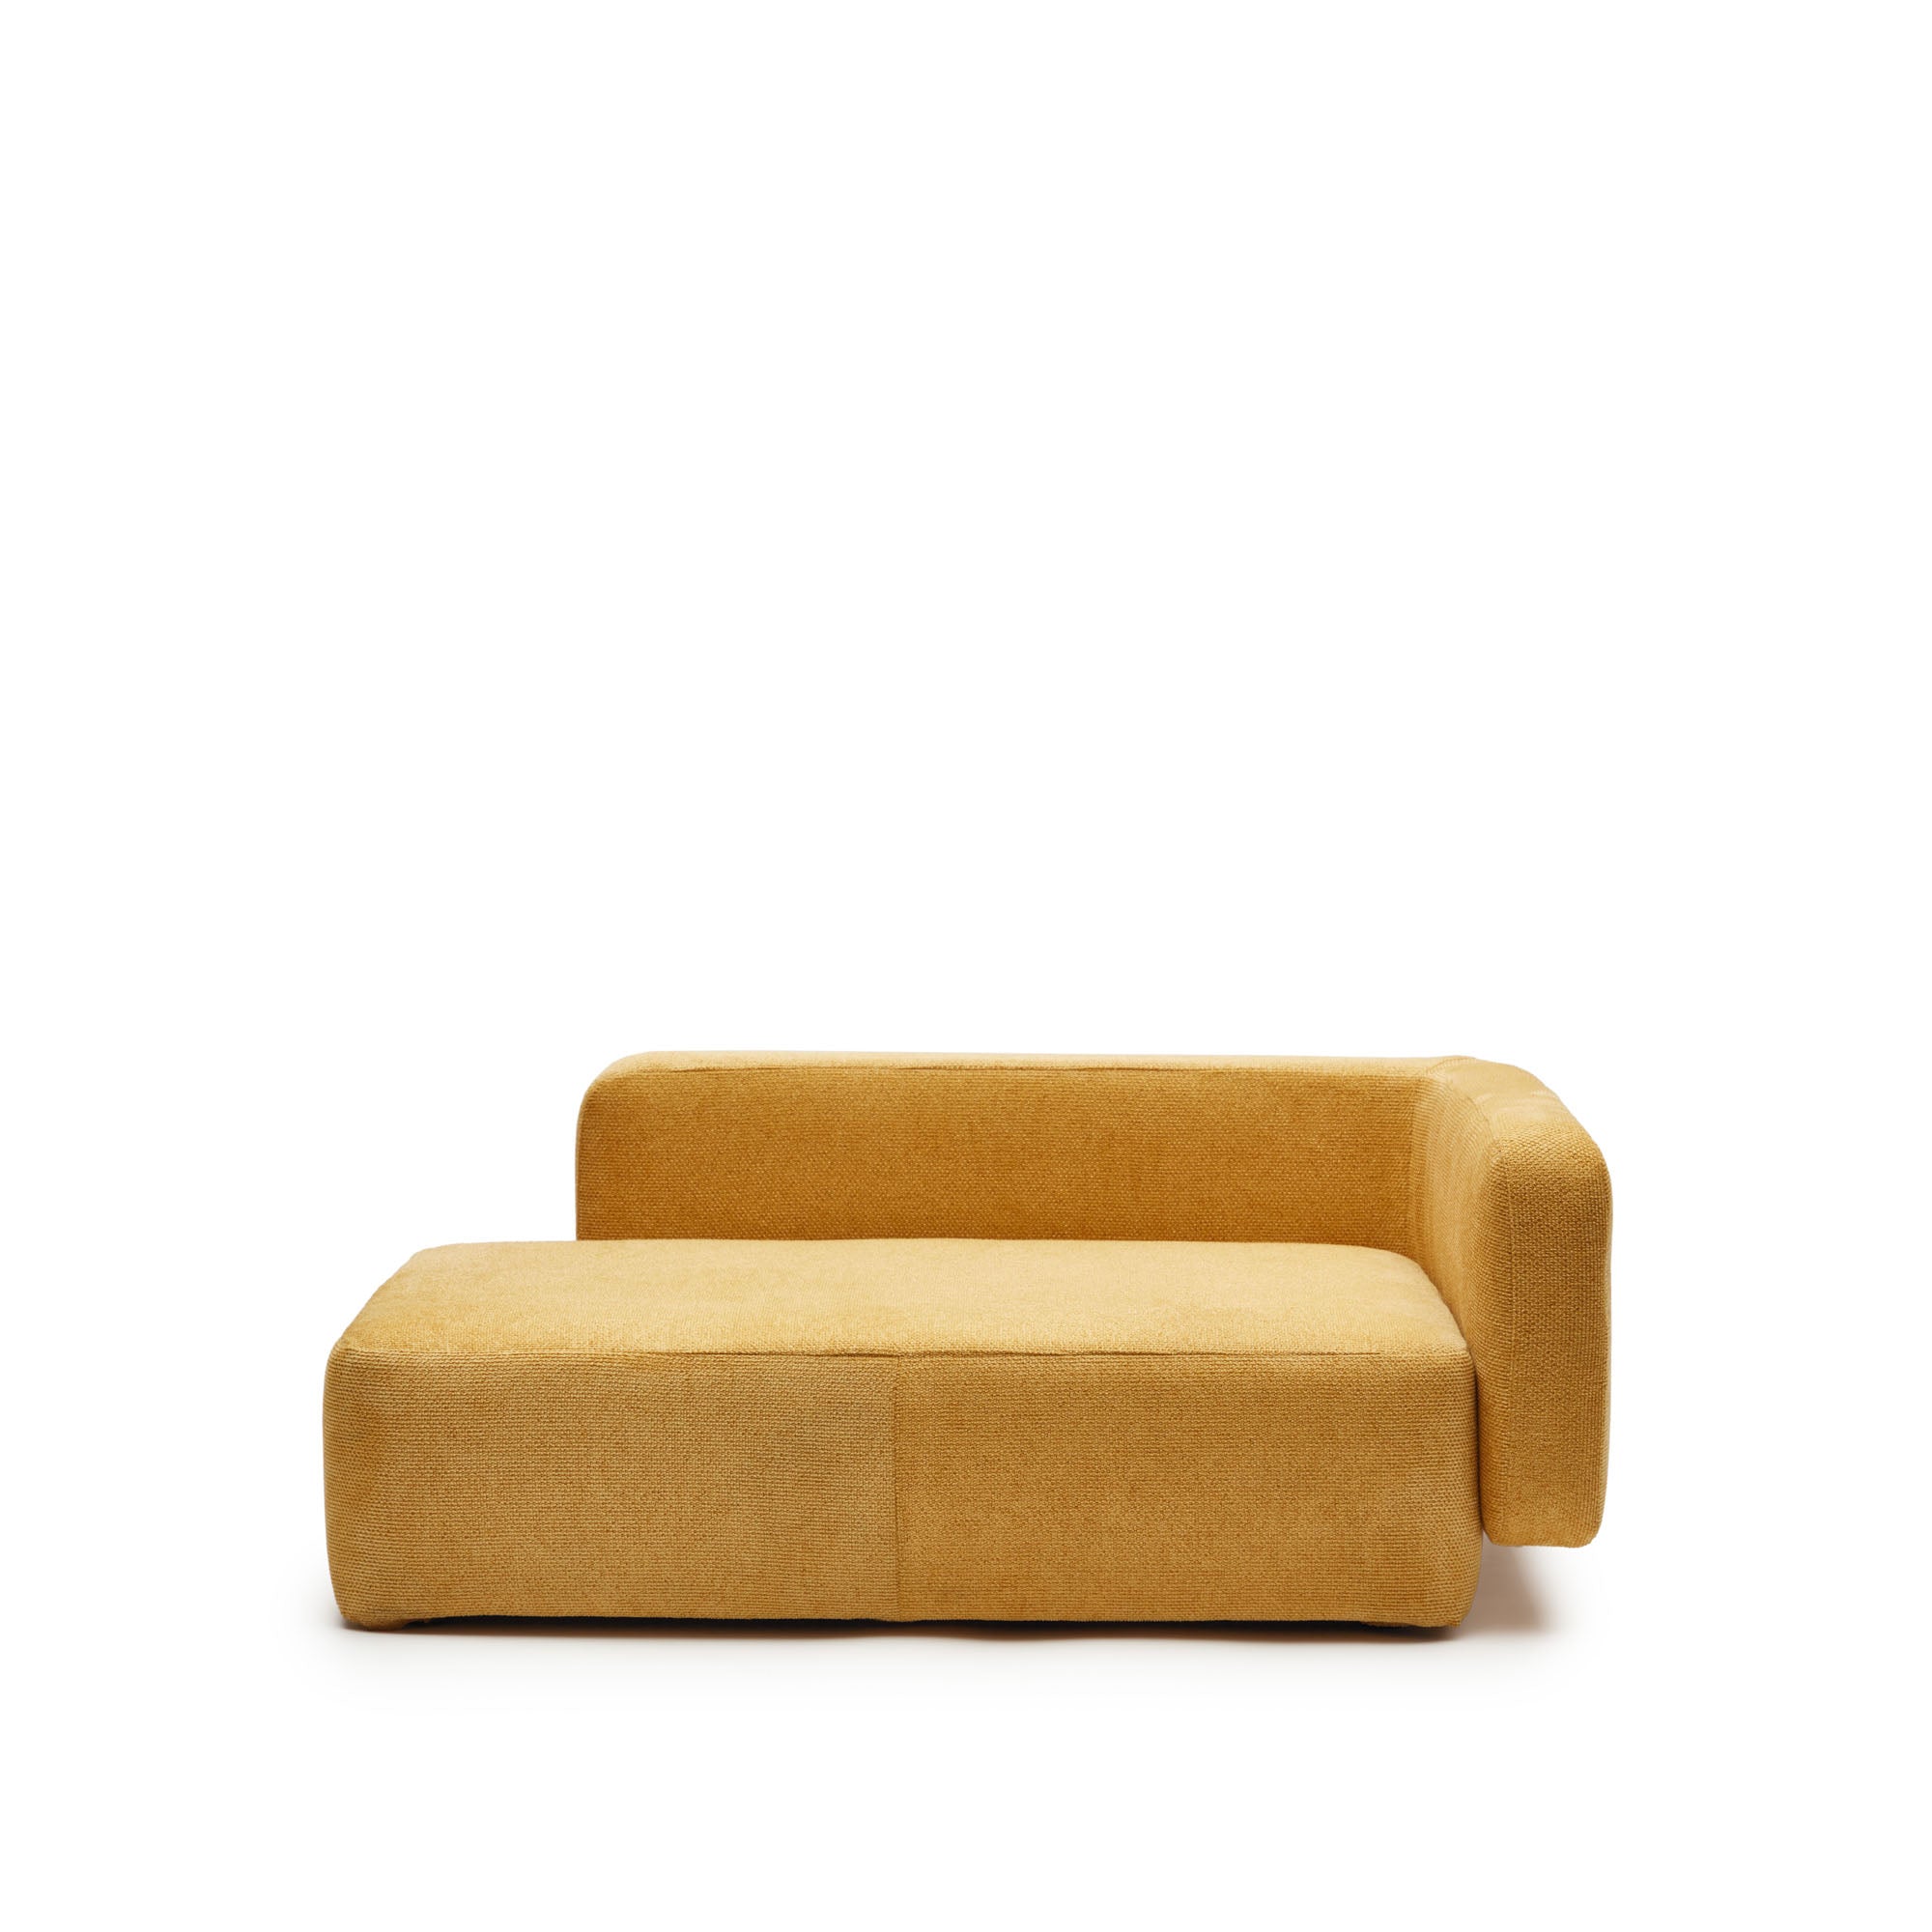 Bowie small bed for pets in mustard 63 x 80 cm